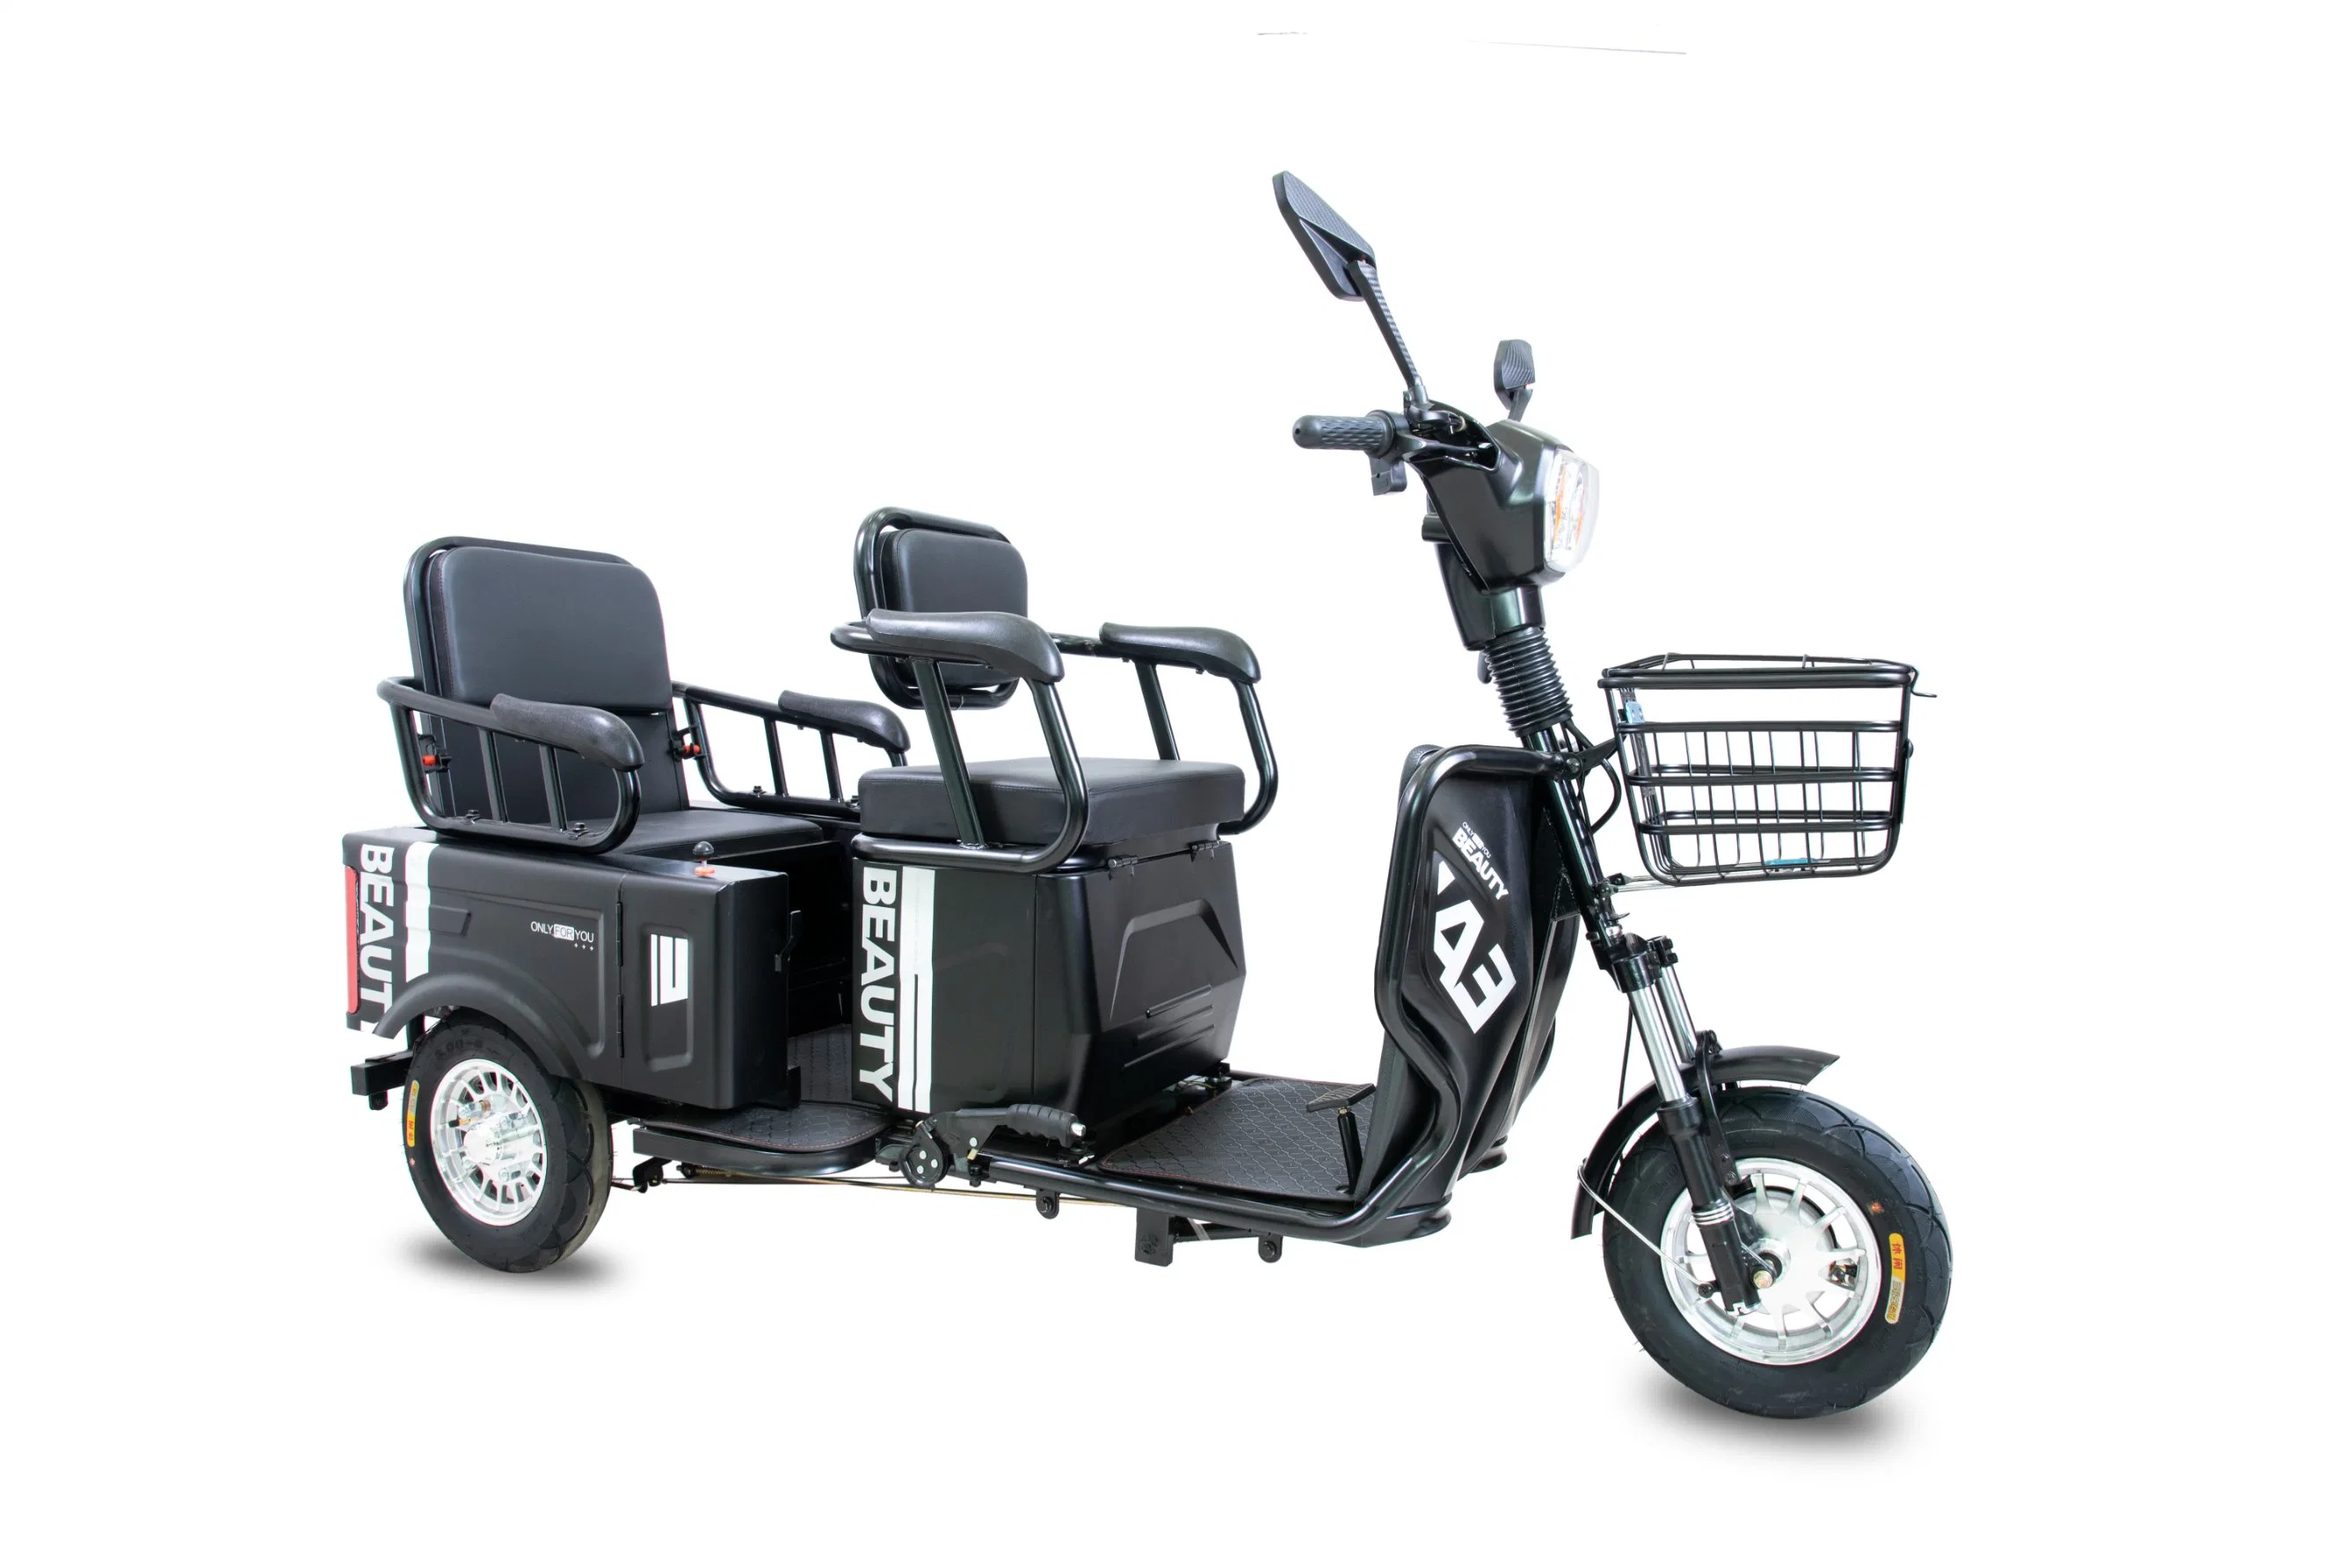 Cheap OEM/ODM Aldult City Electric Tricycle 3 Wheel Motorcycle